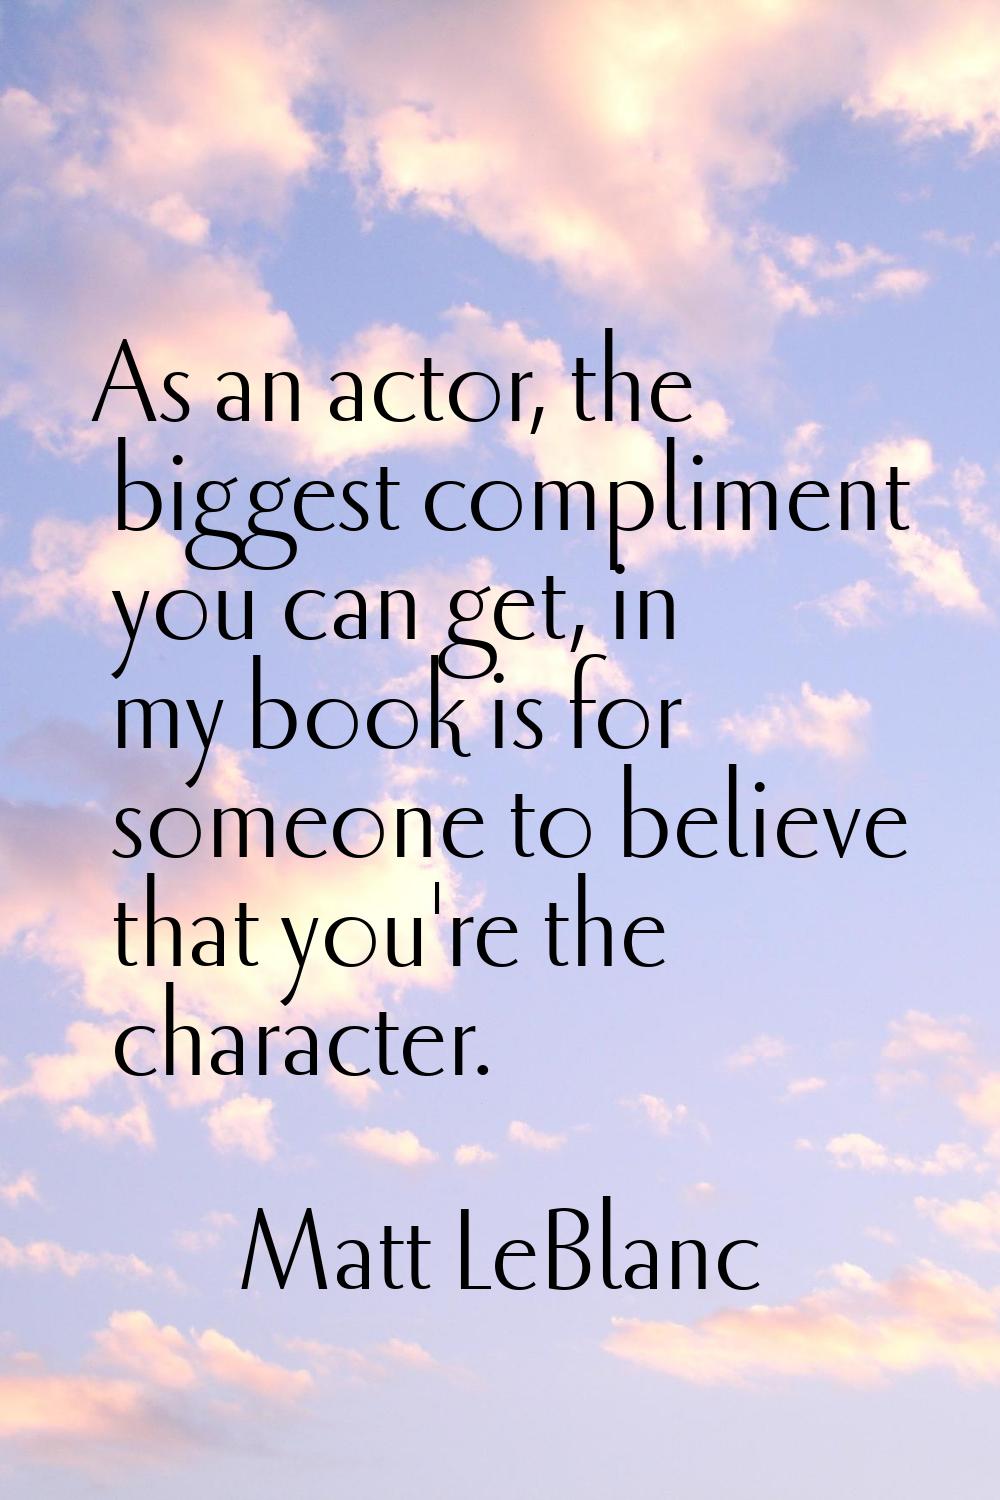 As an actor, the biggest compliment you can get, in my book is for someone to believe that you're t